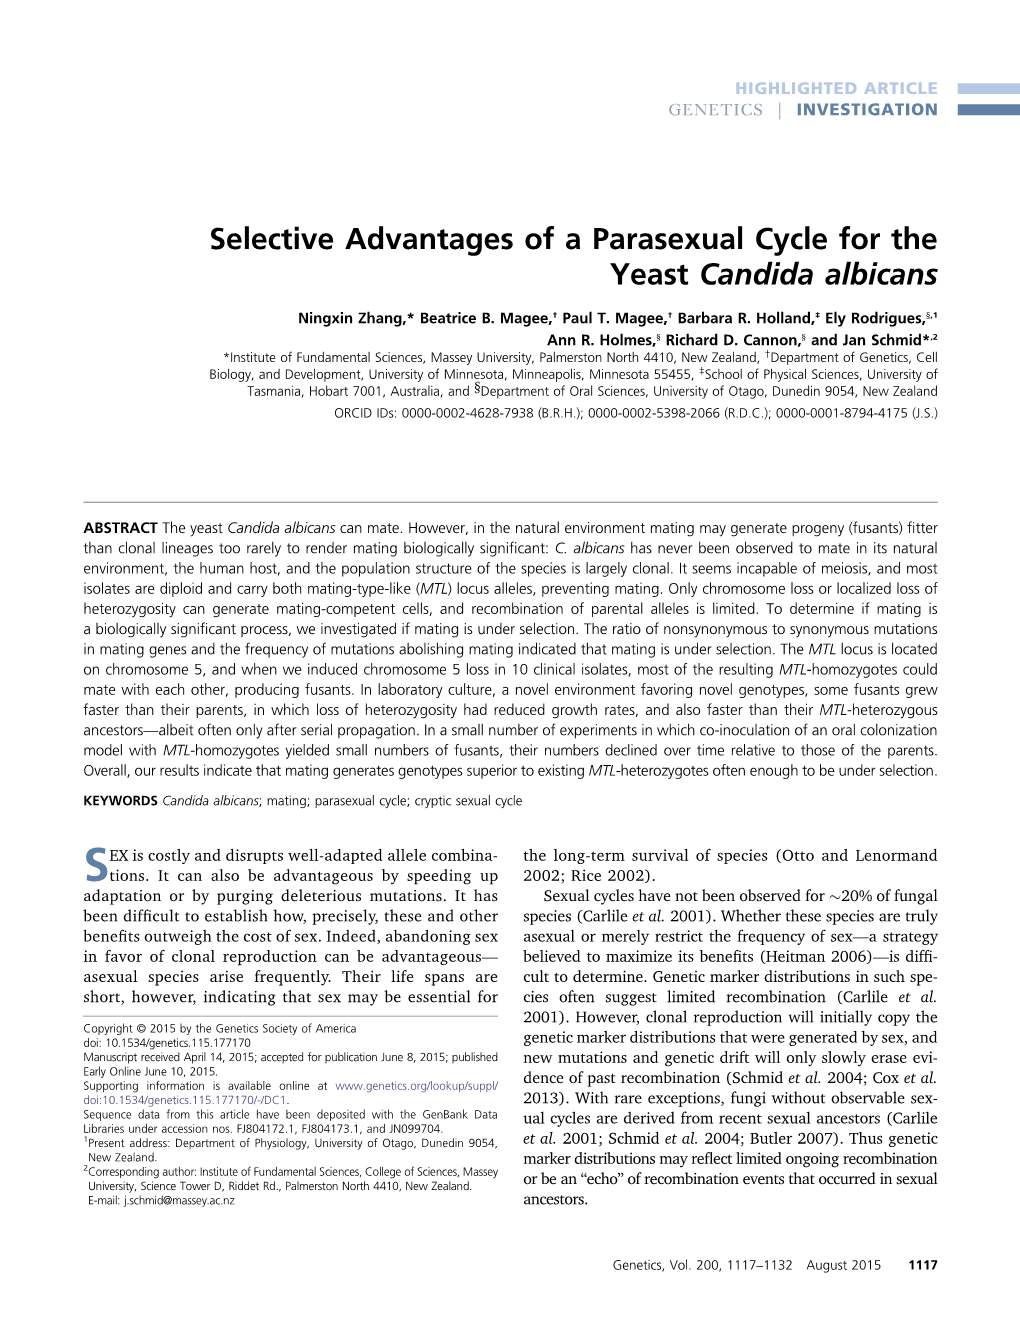 Selective Advantages of a Parasexual Cycle for the Yeast Candida Albicans